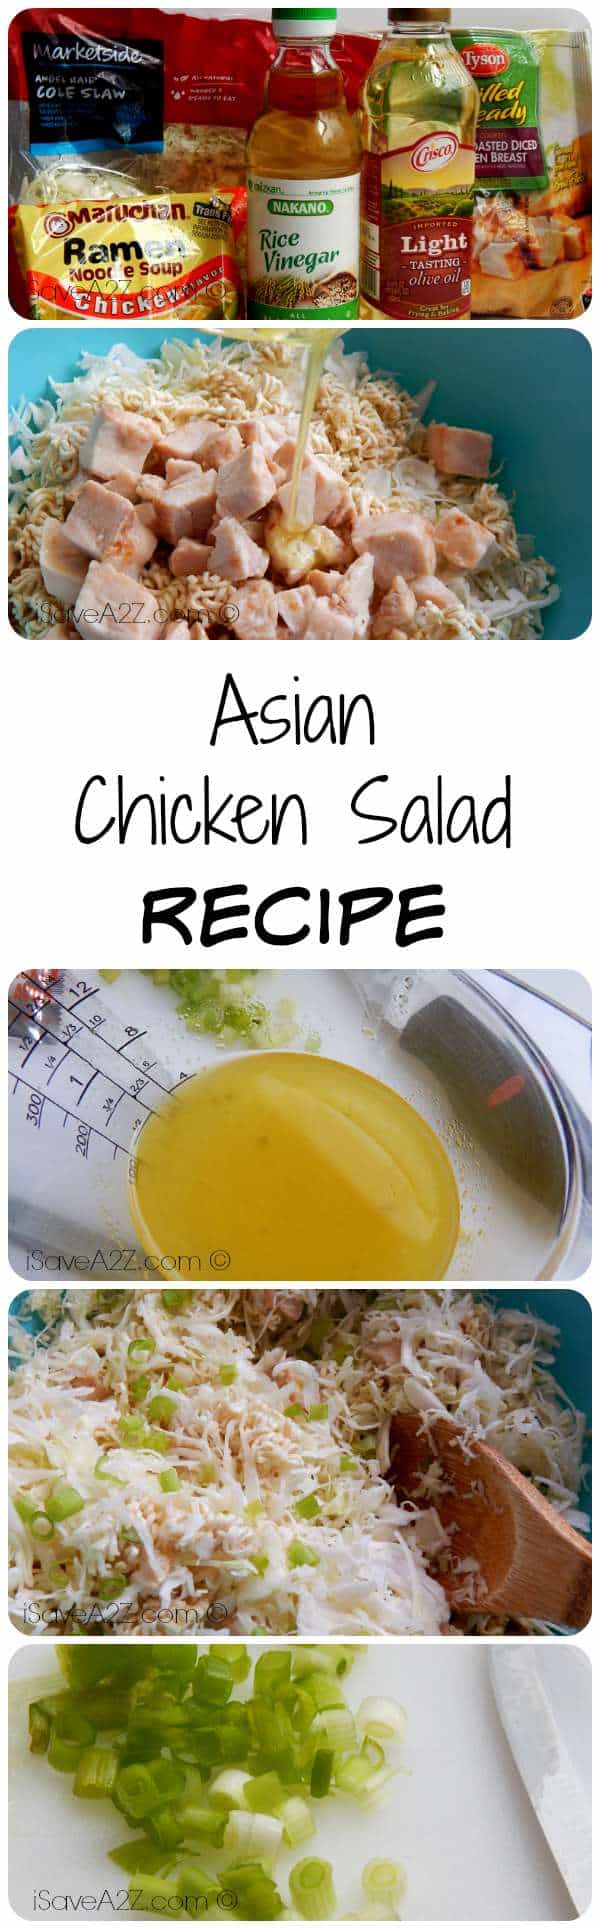 Check out our great recipe for our Asian Chicken Salad! If you're looking for a nice and healthy recipe for you to try out, then this is perfect for you!